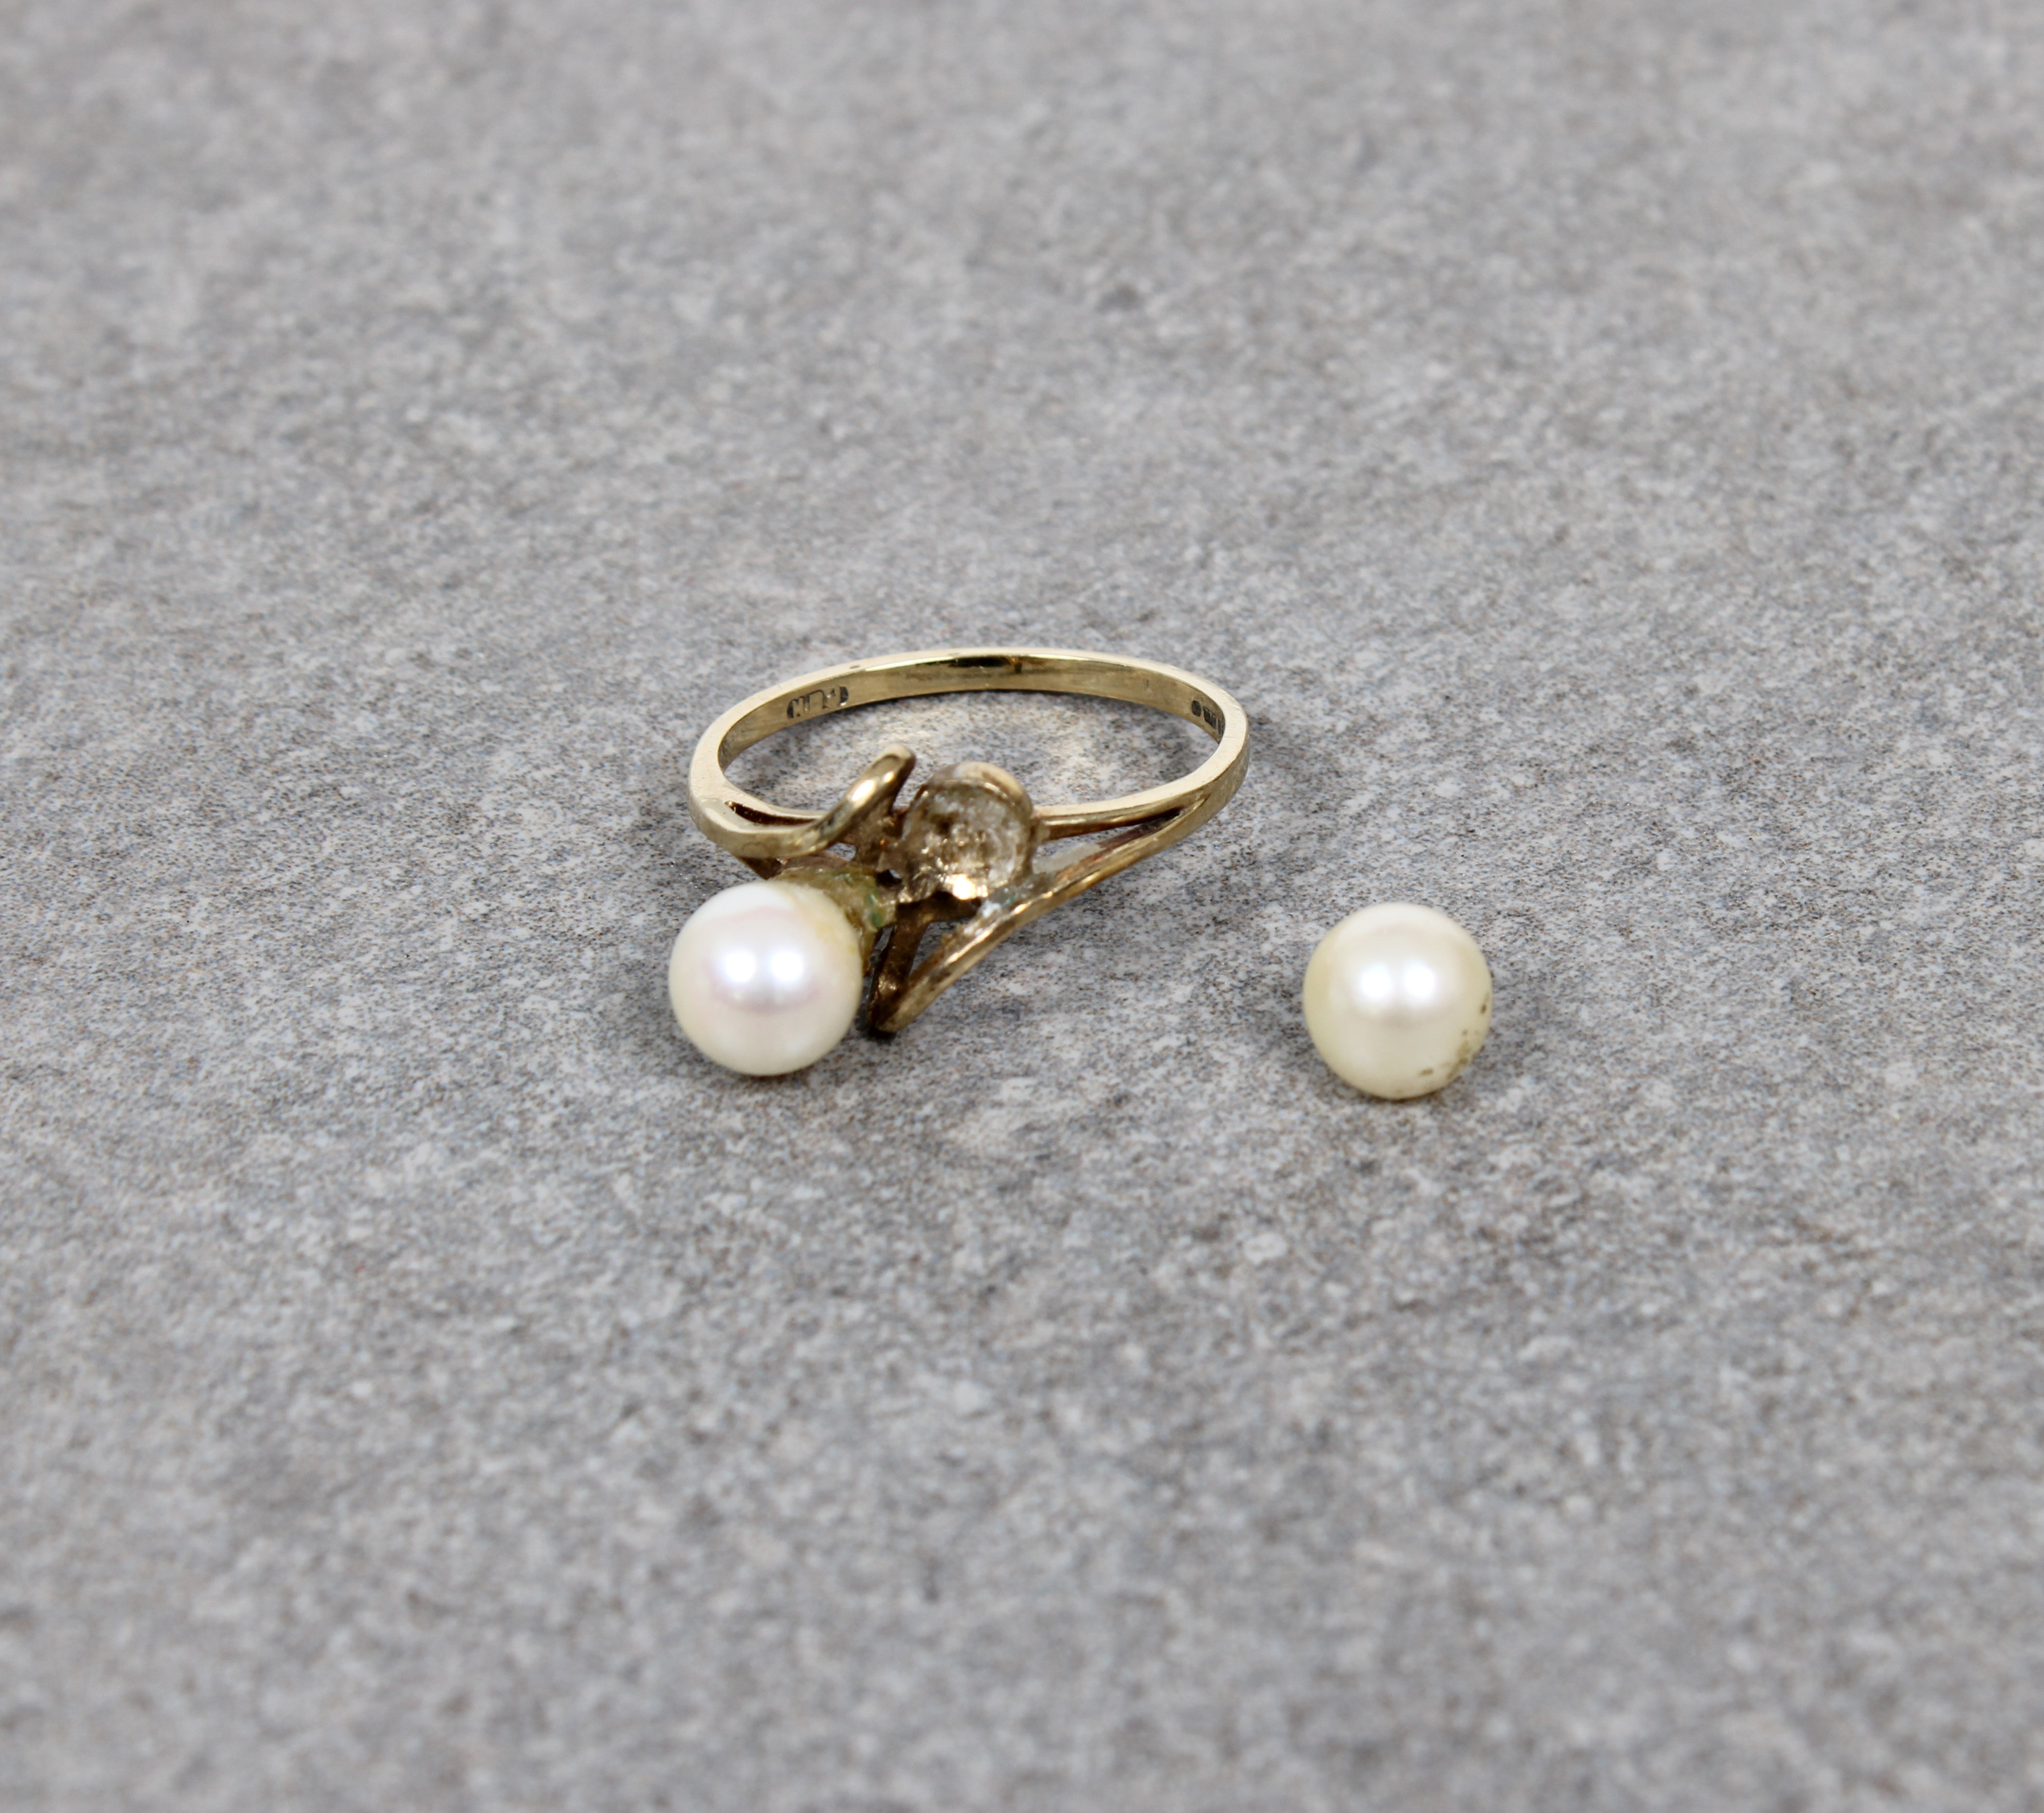 A 9ct gold and two pearl twist ring